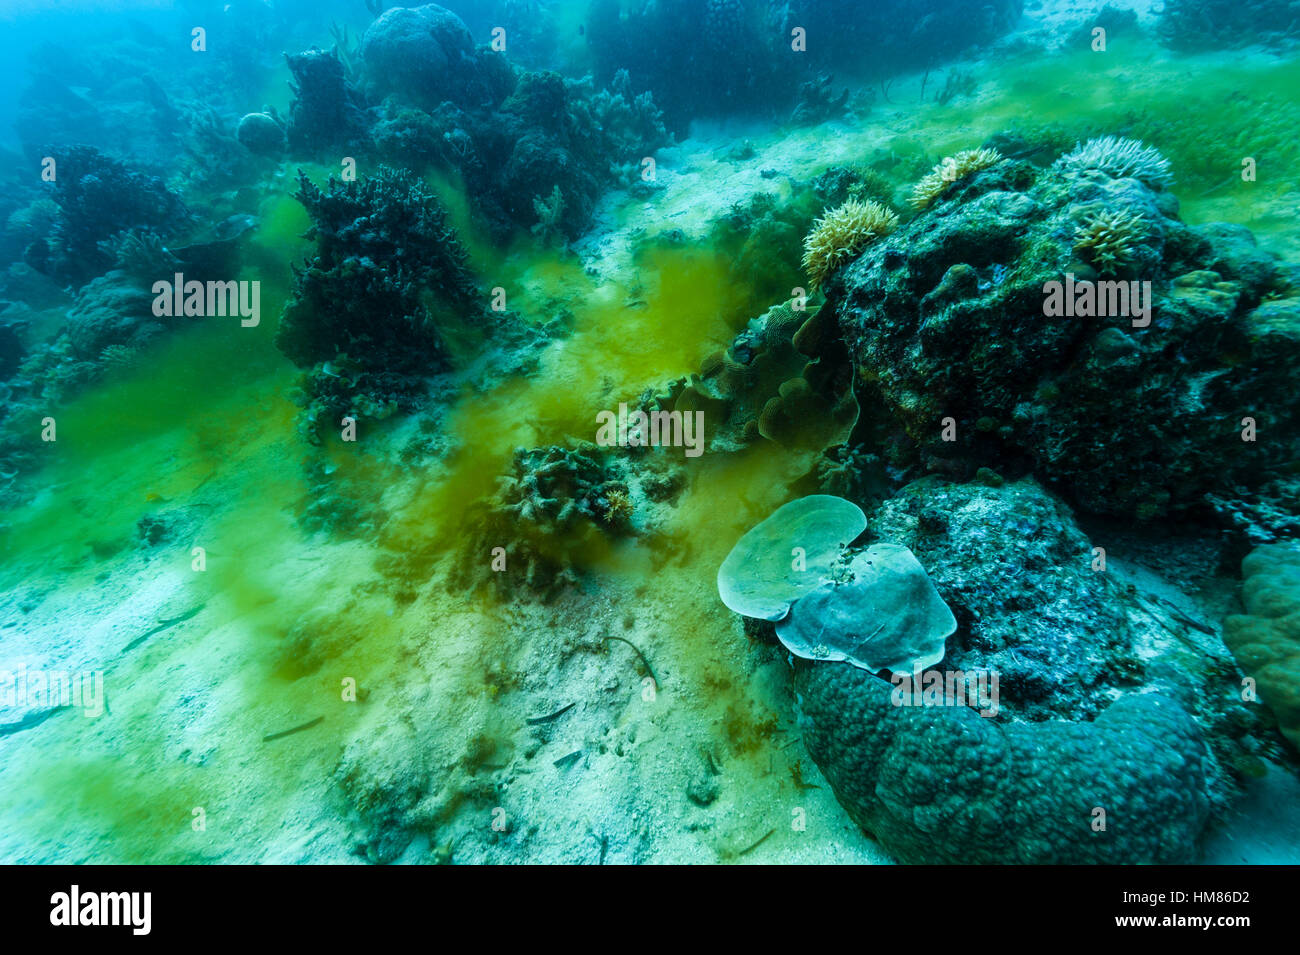 An phytoplankton algae bloom descending down the slope of a tropical reef. Stock Photo